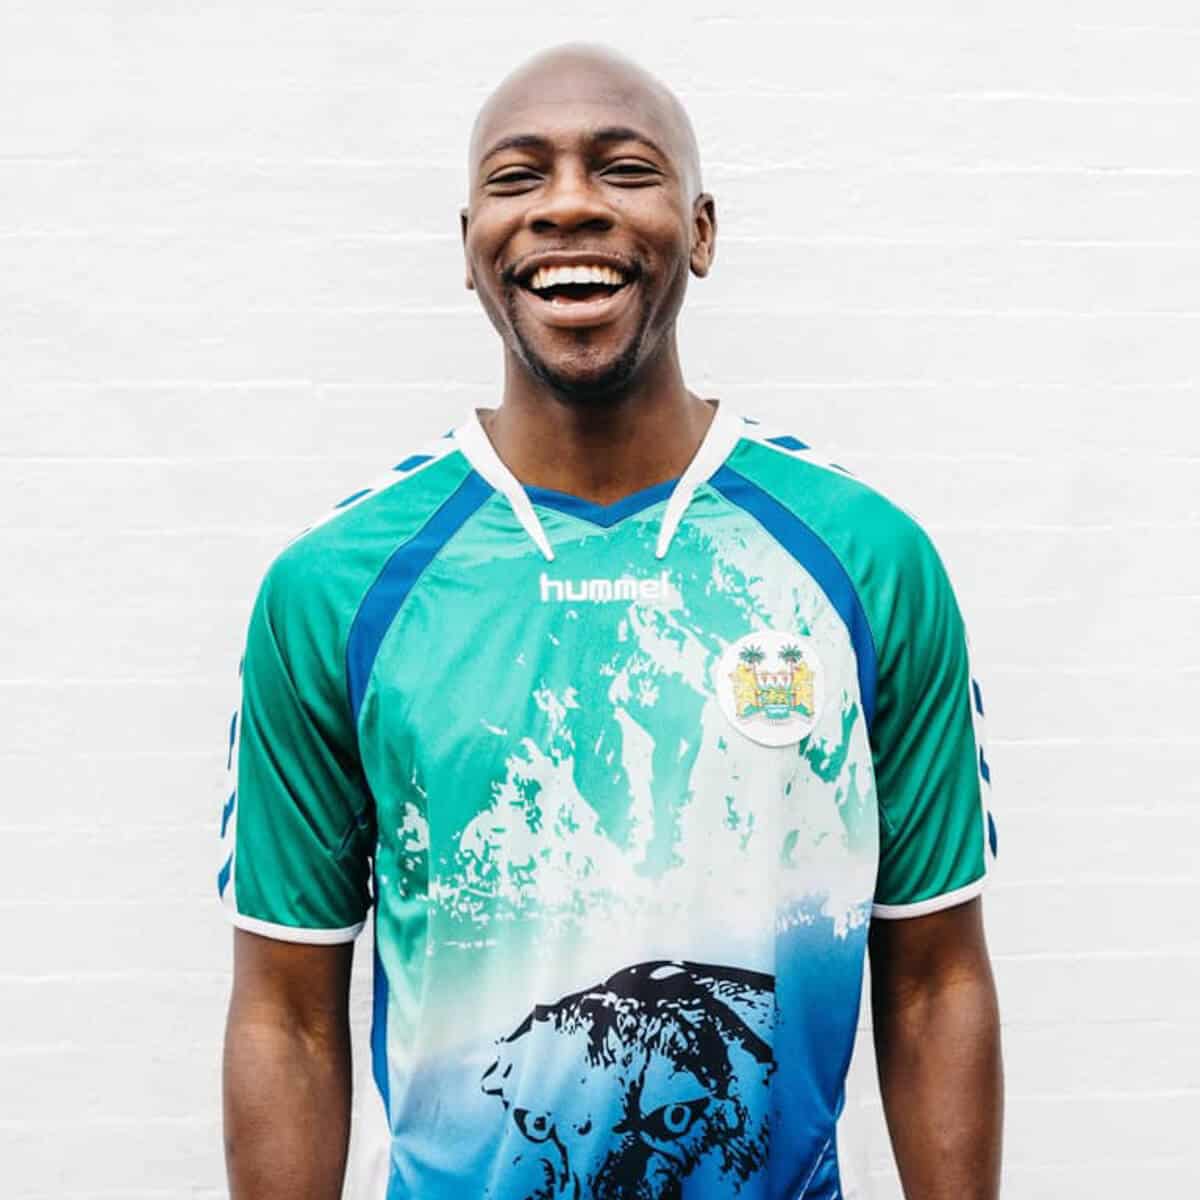 A smiling man wearing a soccer jersey.